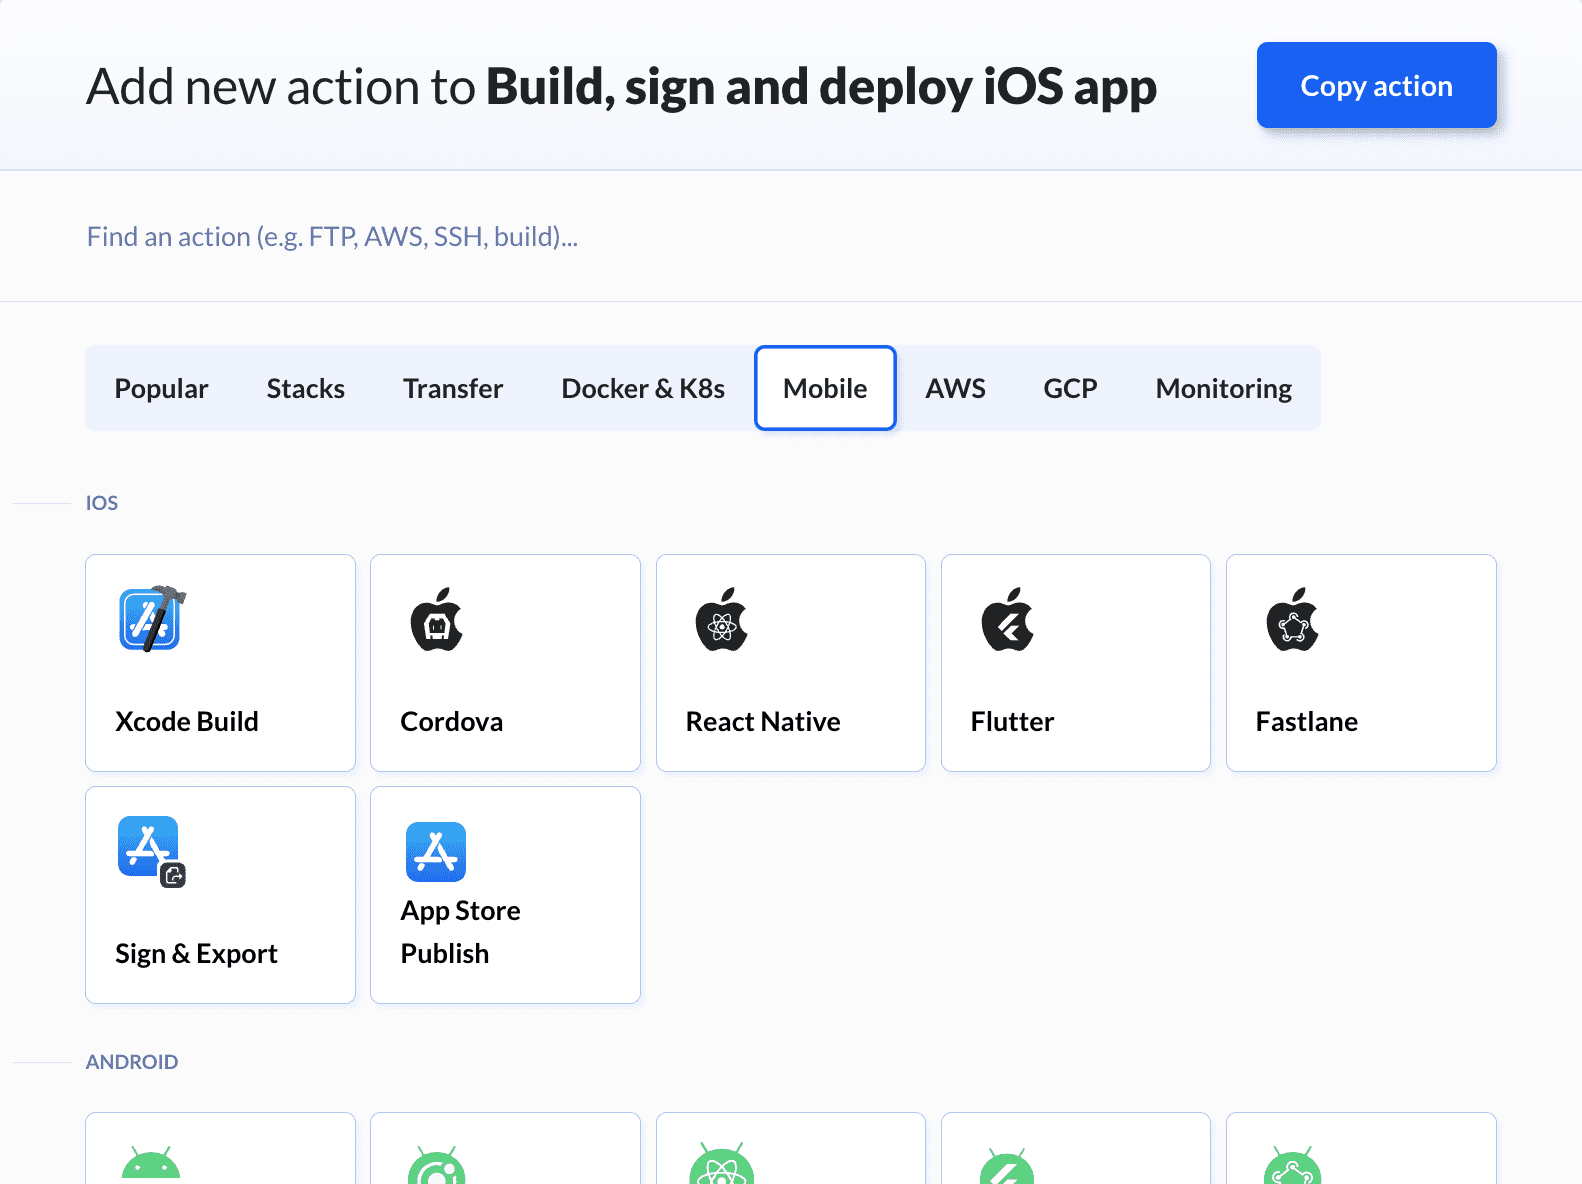 iOS actions